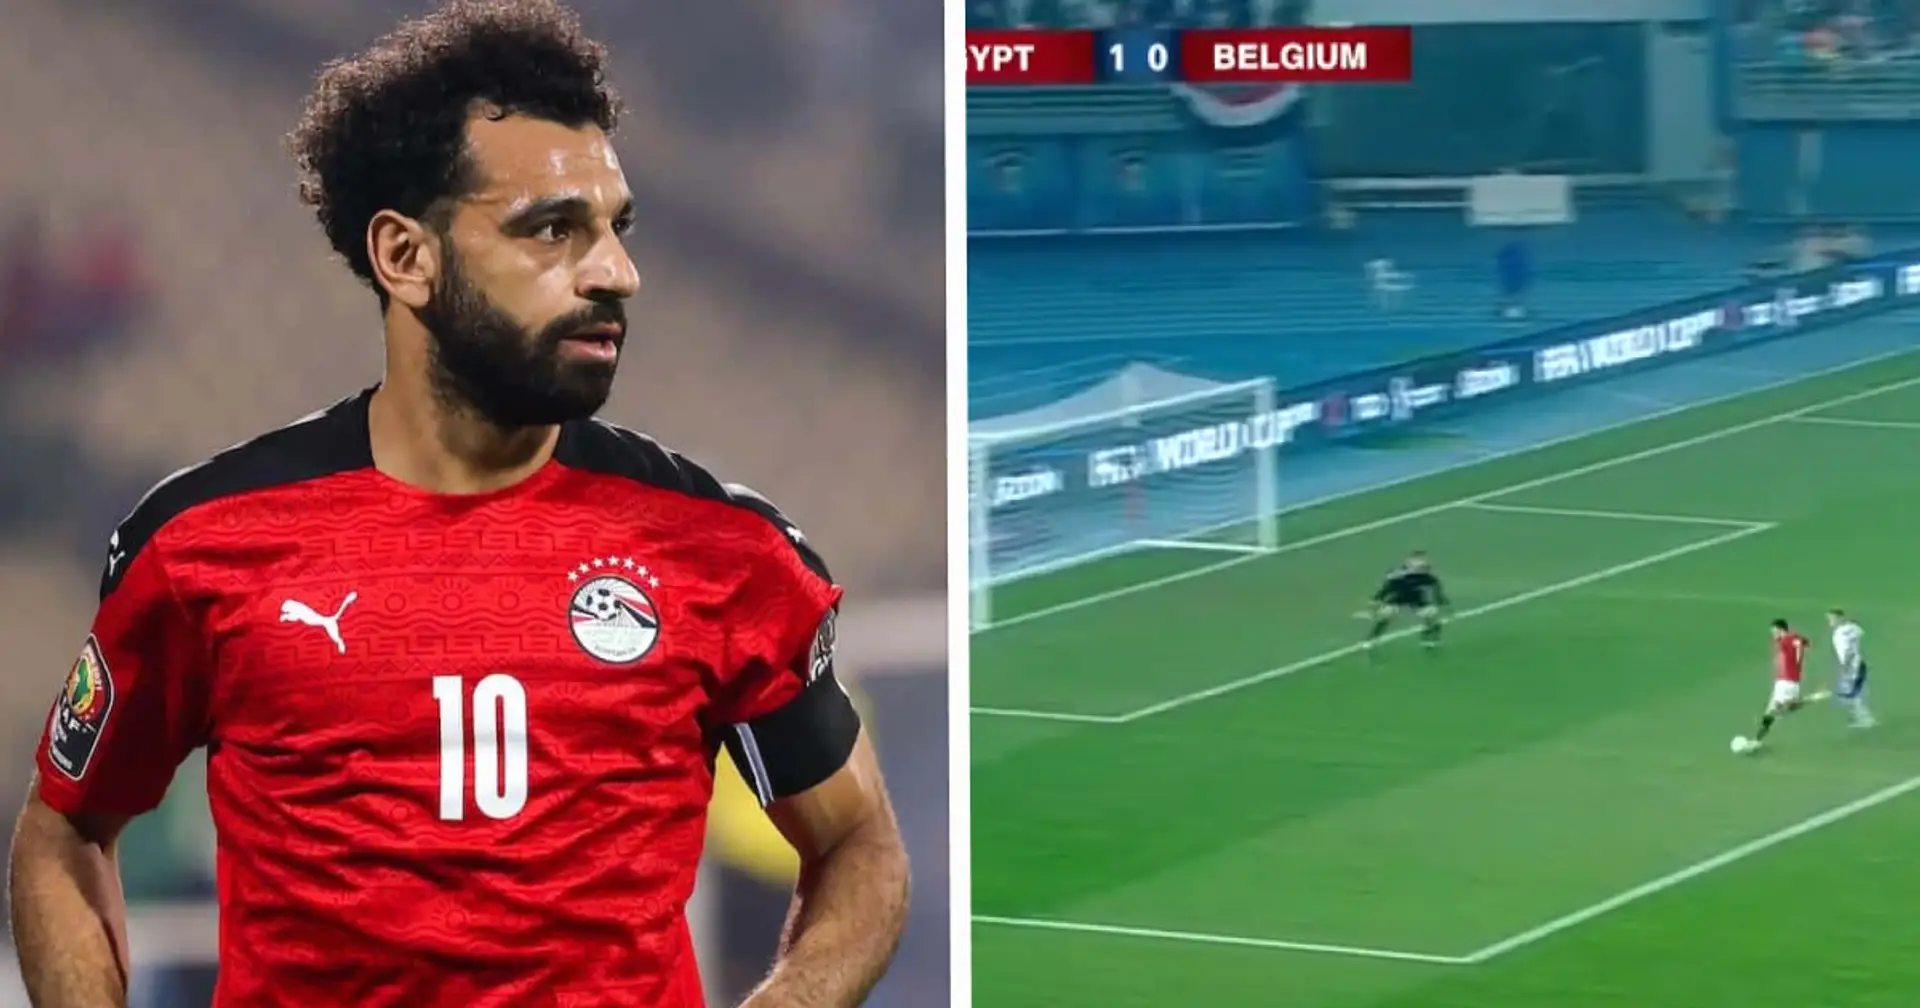 Spotted: Salah delivers astonishing assist as Egypt lead Belgium 2-0